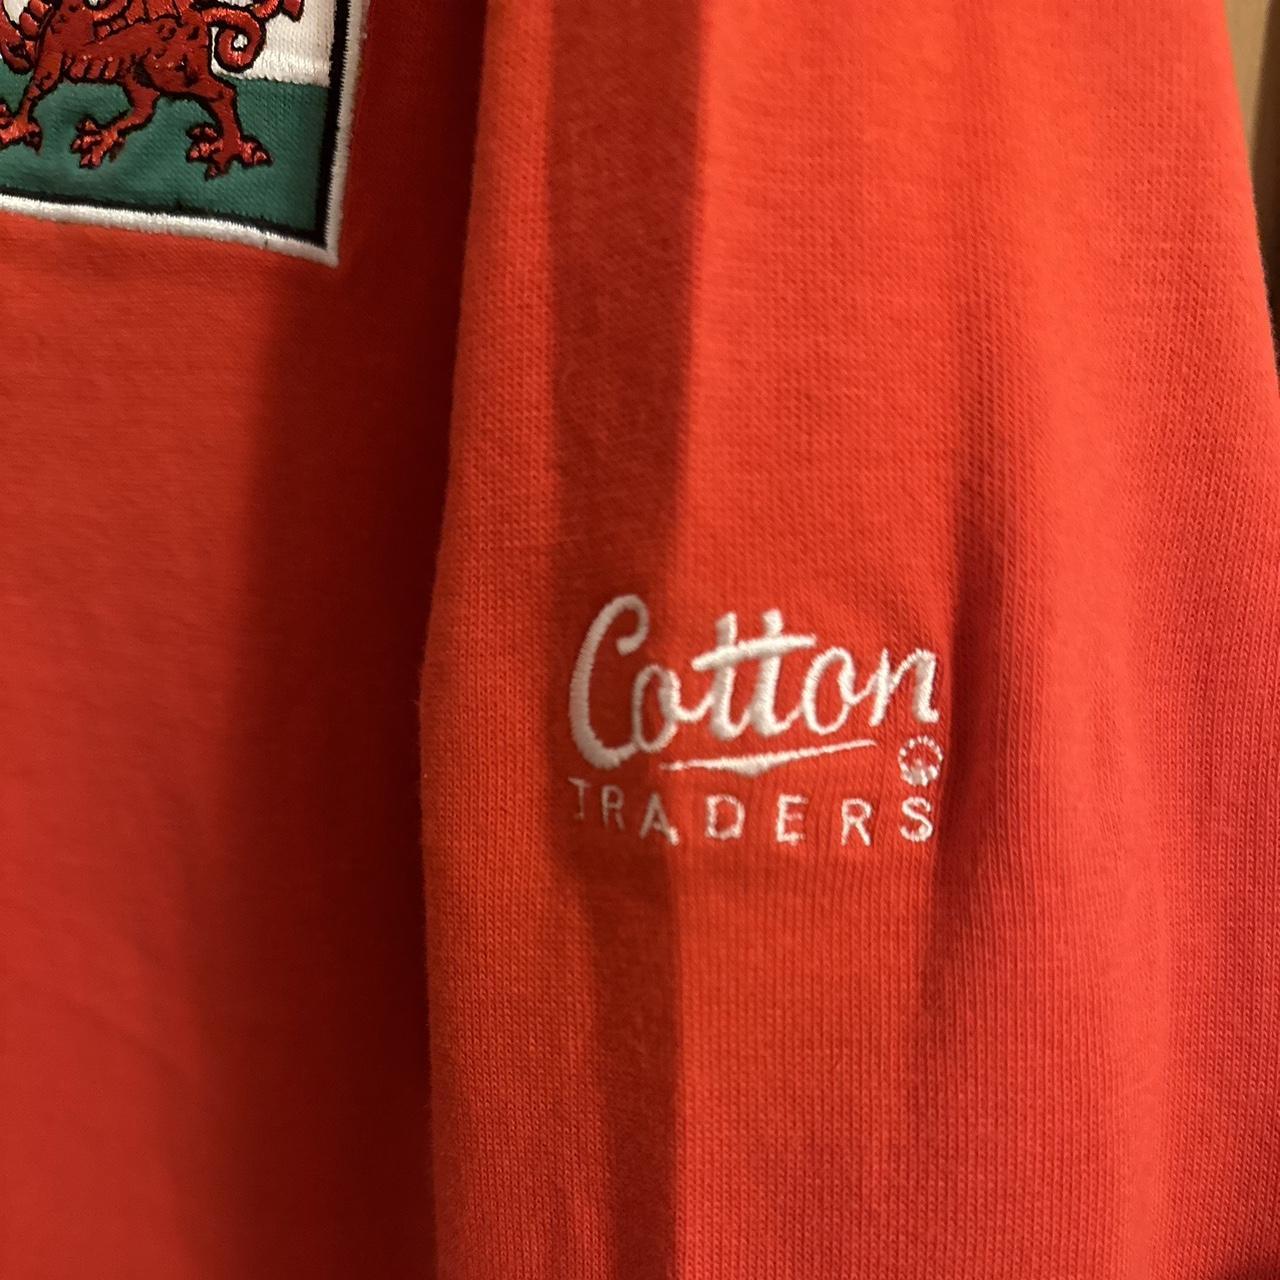 Vintage Wales Cotton Traders Rugby Shirt / Polo... - Depop